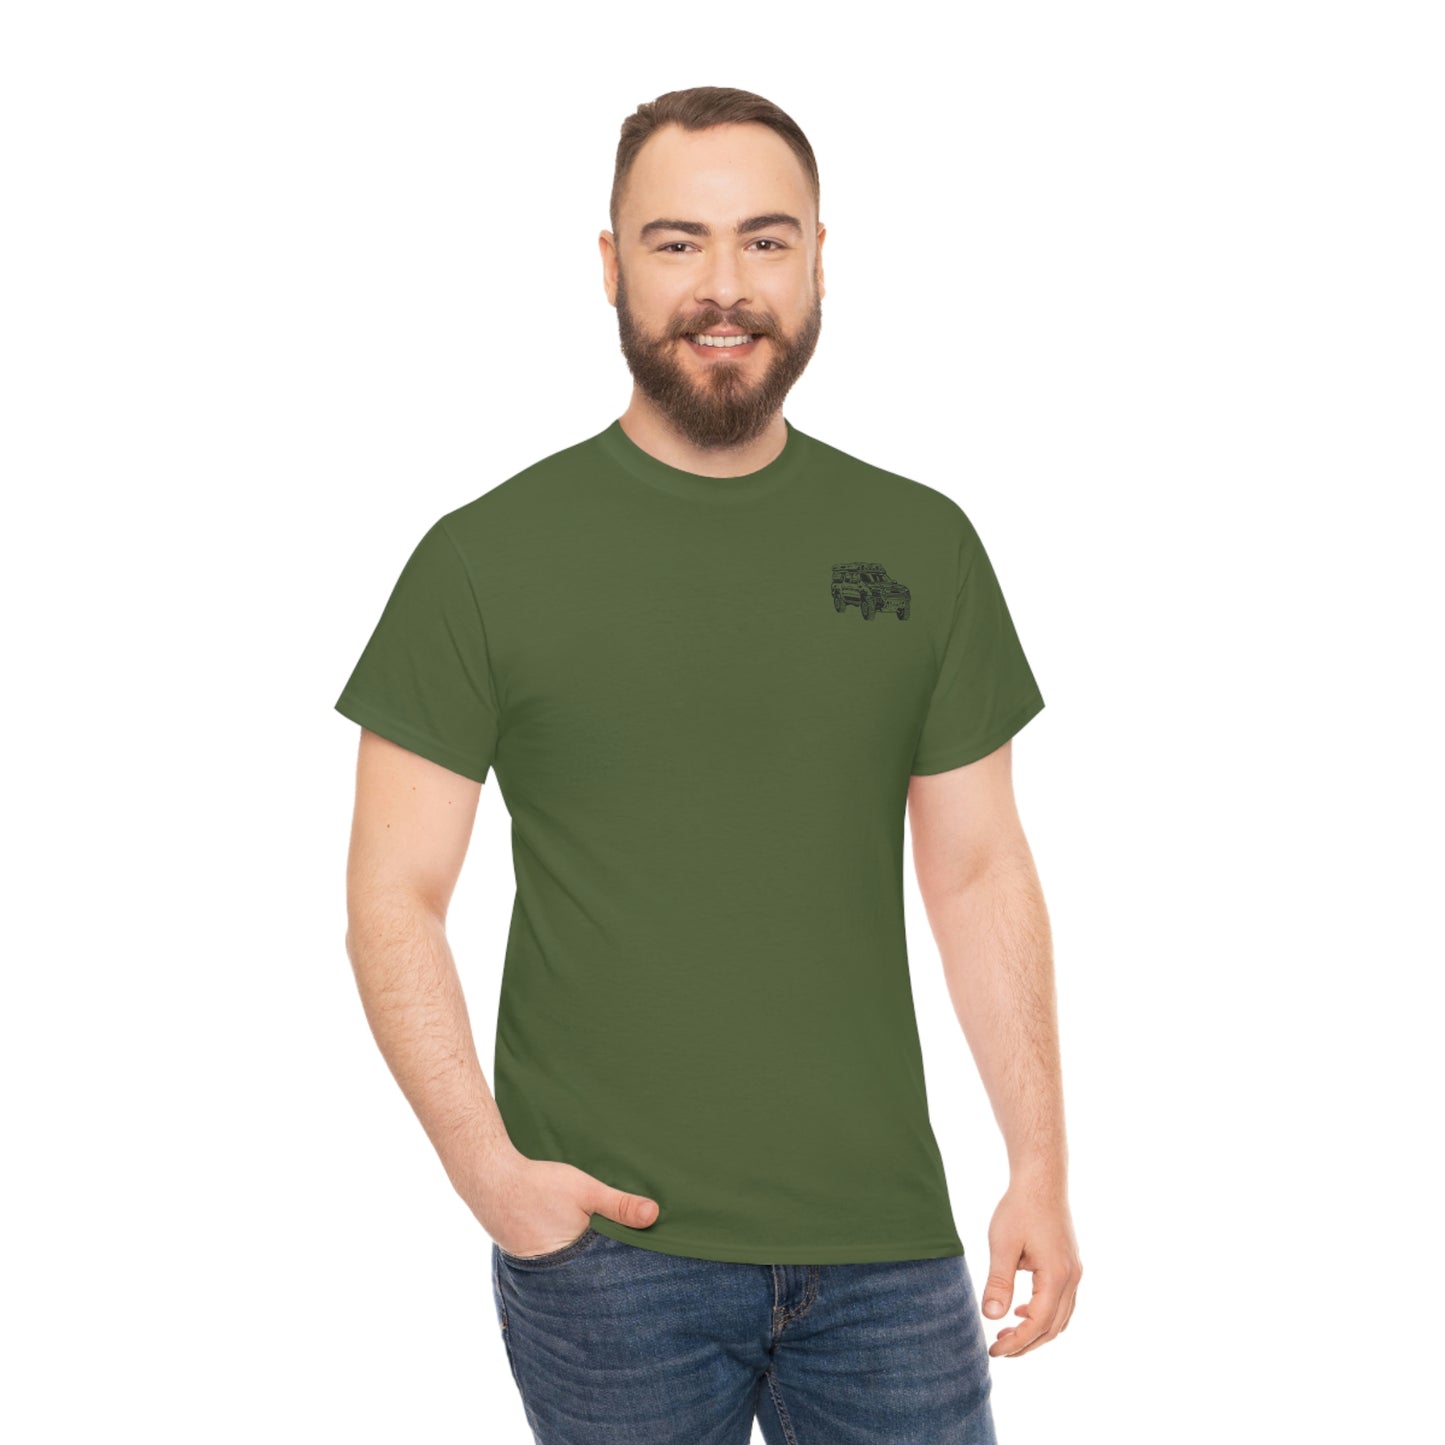 Thrashed Off-Road Overland All Day Shirt